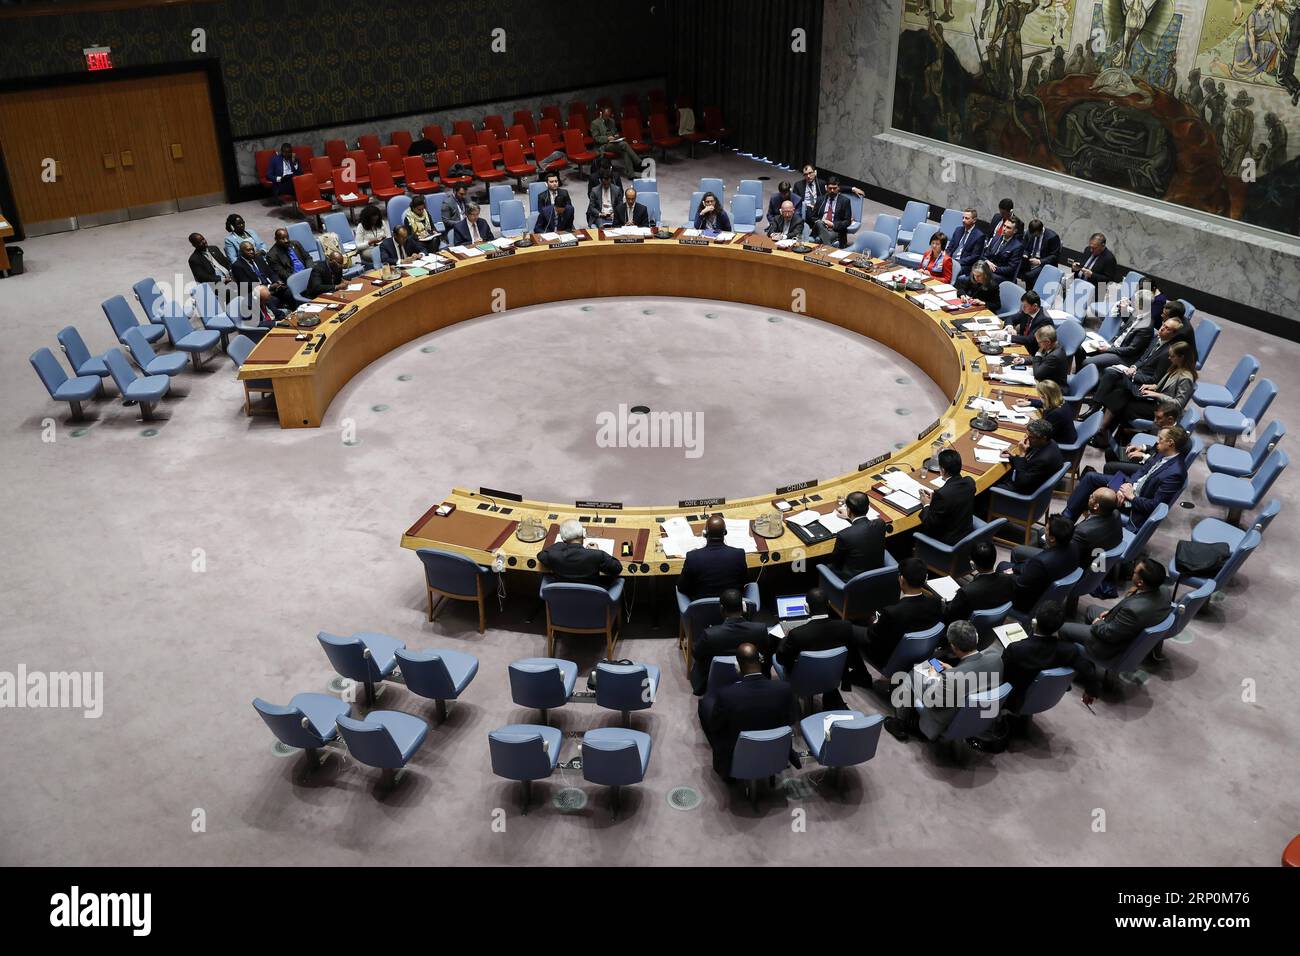 News Bilder des Tages (180519) -- UNITED NATIONS, May 19, 2018 -- Photo taken on May 17, 2018 shows the scene of the United Nations (UN) Security Council high-level open debate on upholding international law for world peace and security, at the UN headquarters in New York. While concerns about the authority and mandated duties of the UN Security Council were raised at a high-level open debate on Thursday, China threw its considerable weight behind it, one of the six UN principal organs for maintaining international peace and security. ) (sxk) UN-SECURITY COUNCIL-MEETING-INTERNATIONAL LAW LixMu Stock Photo